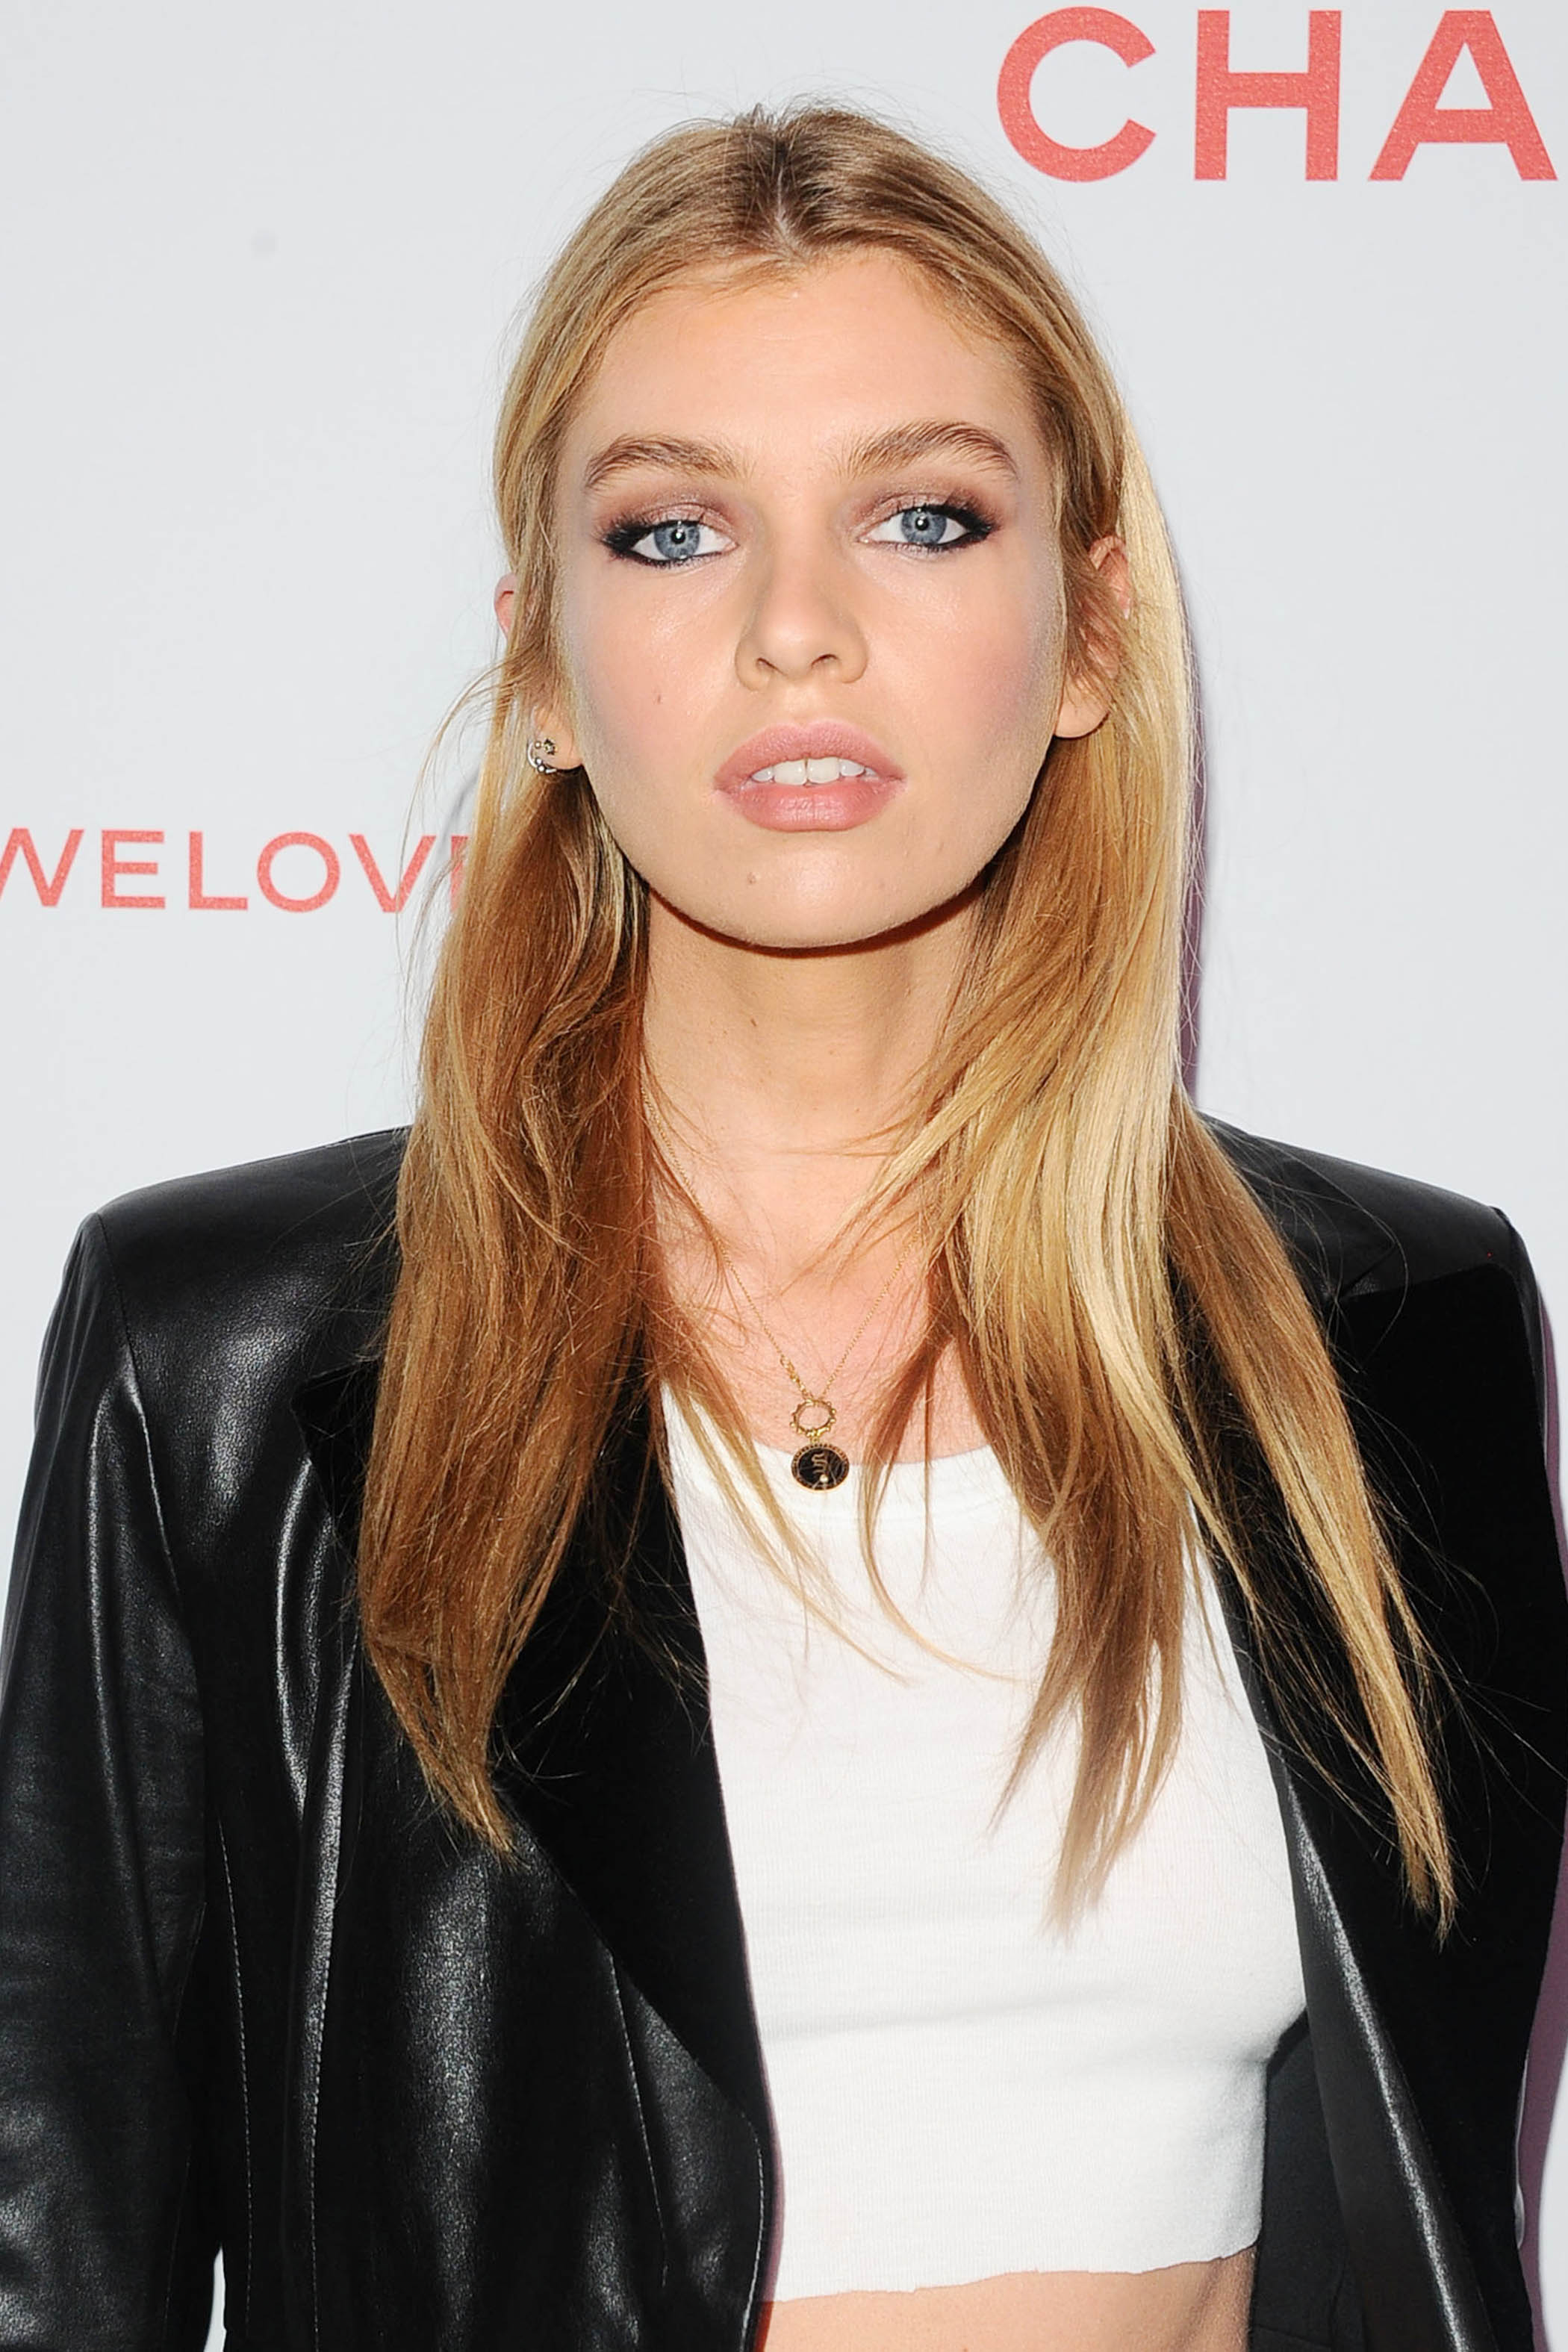 Stella Maxwell attends Chanel Party to Celebrate the Chanel Beauty House